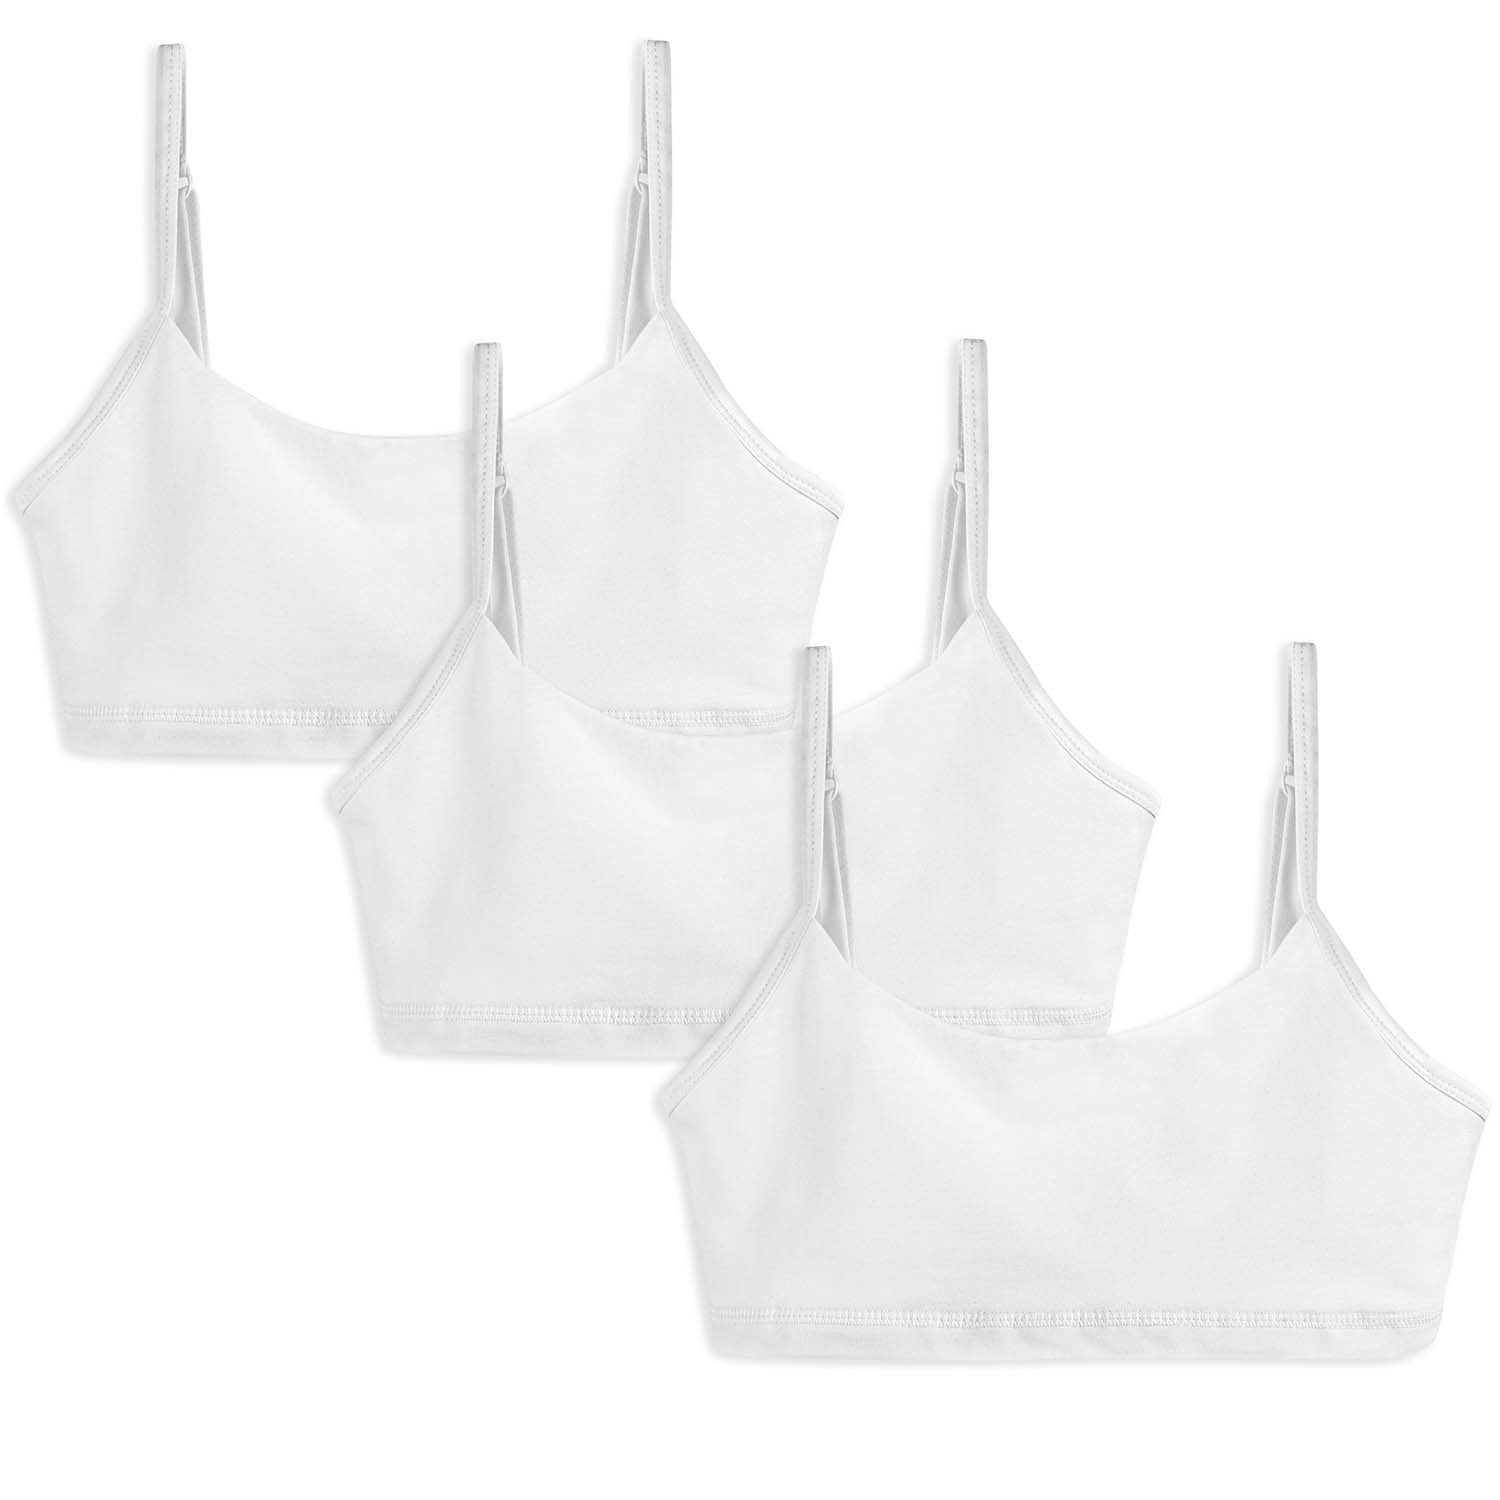 Organic Cotton Girls Bras 3 Pack: Comfortable Bralettes - Mightly